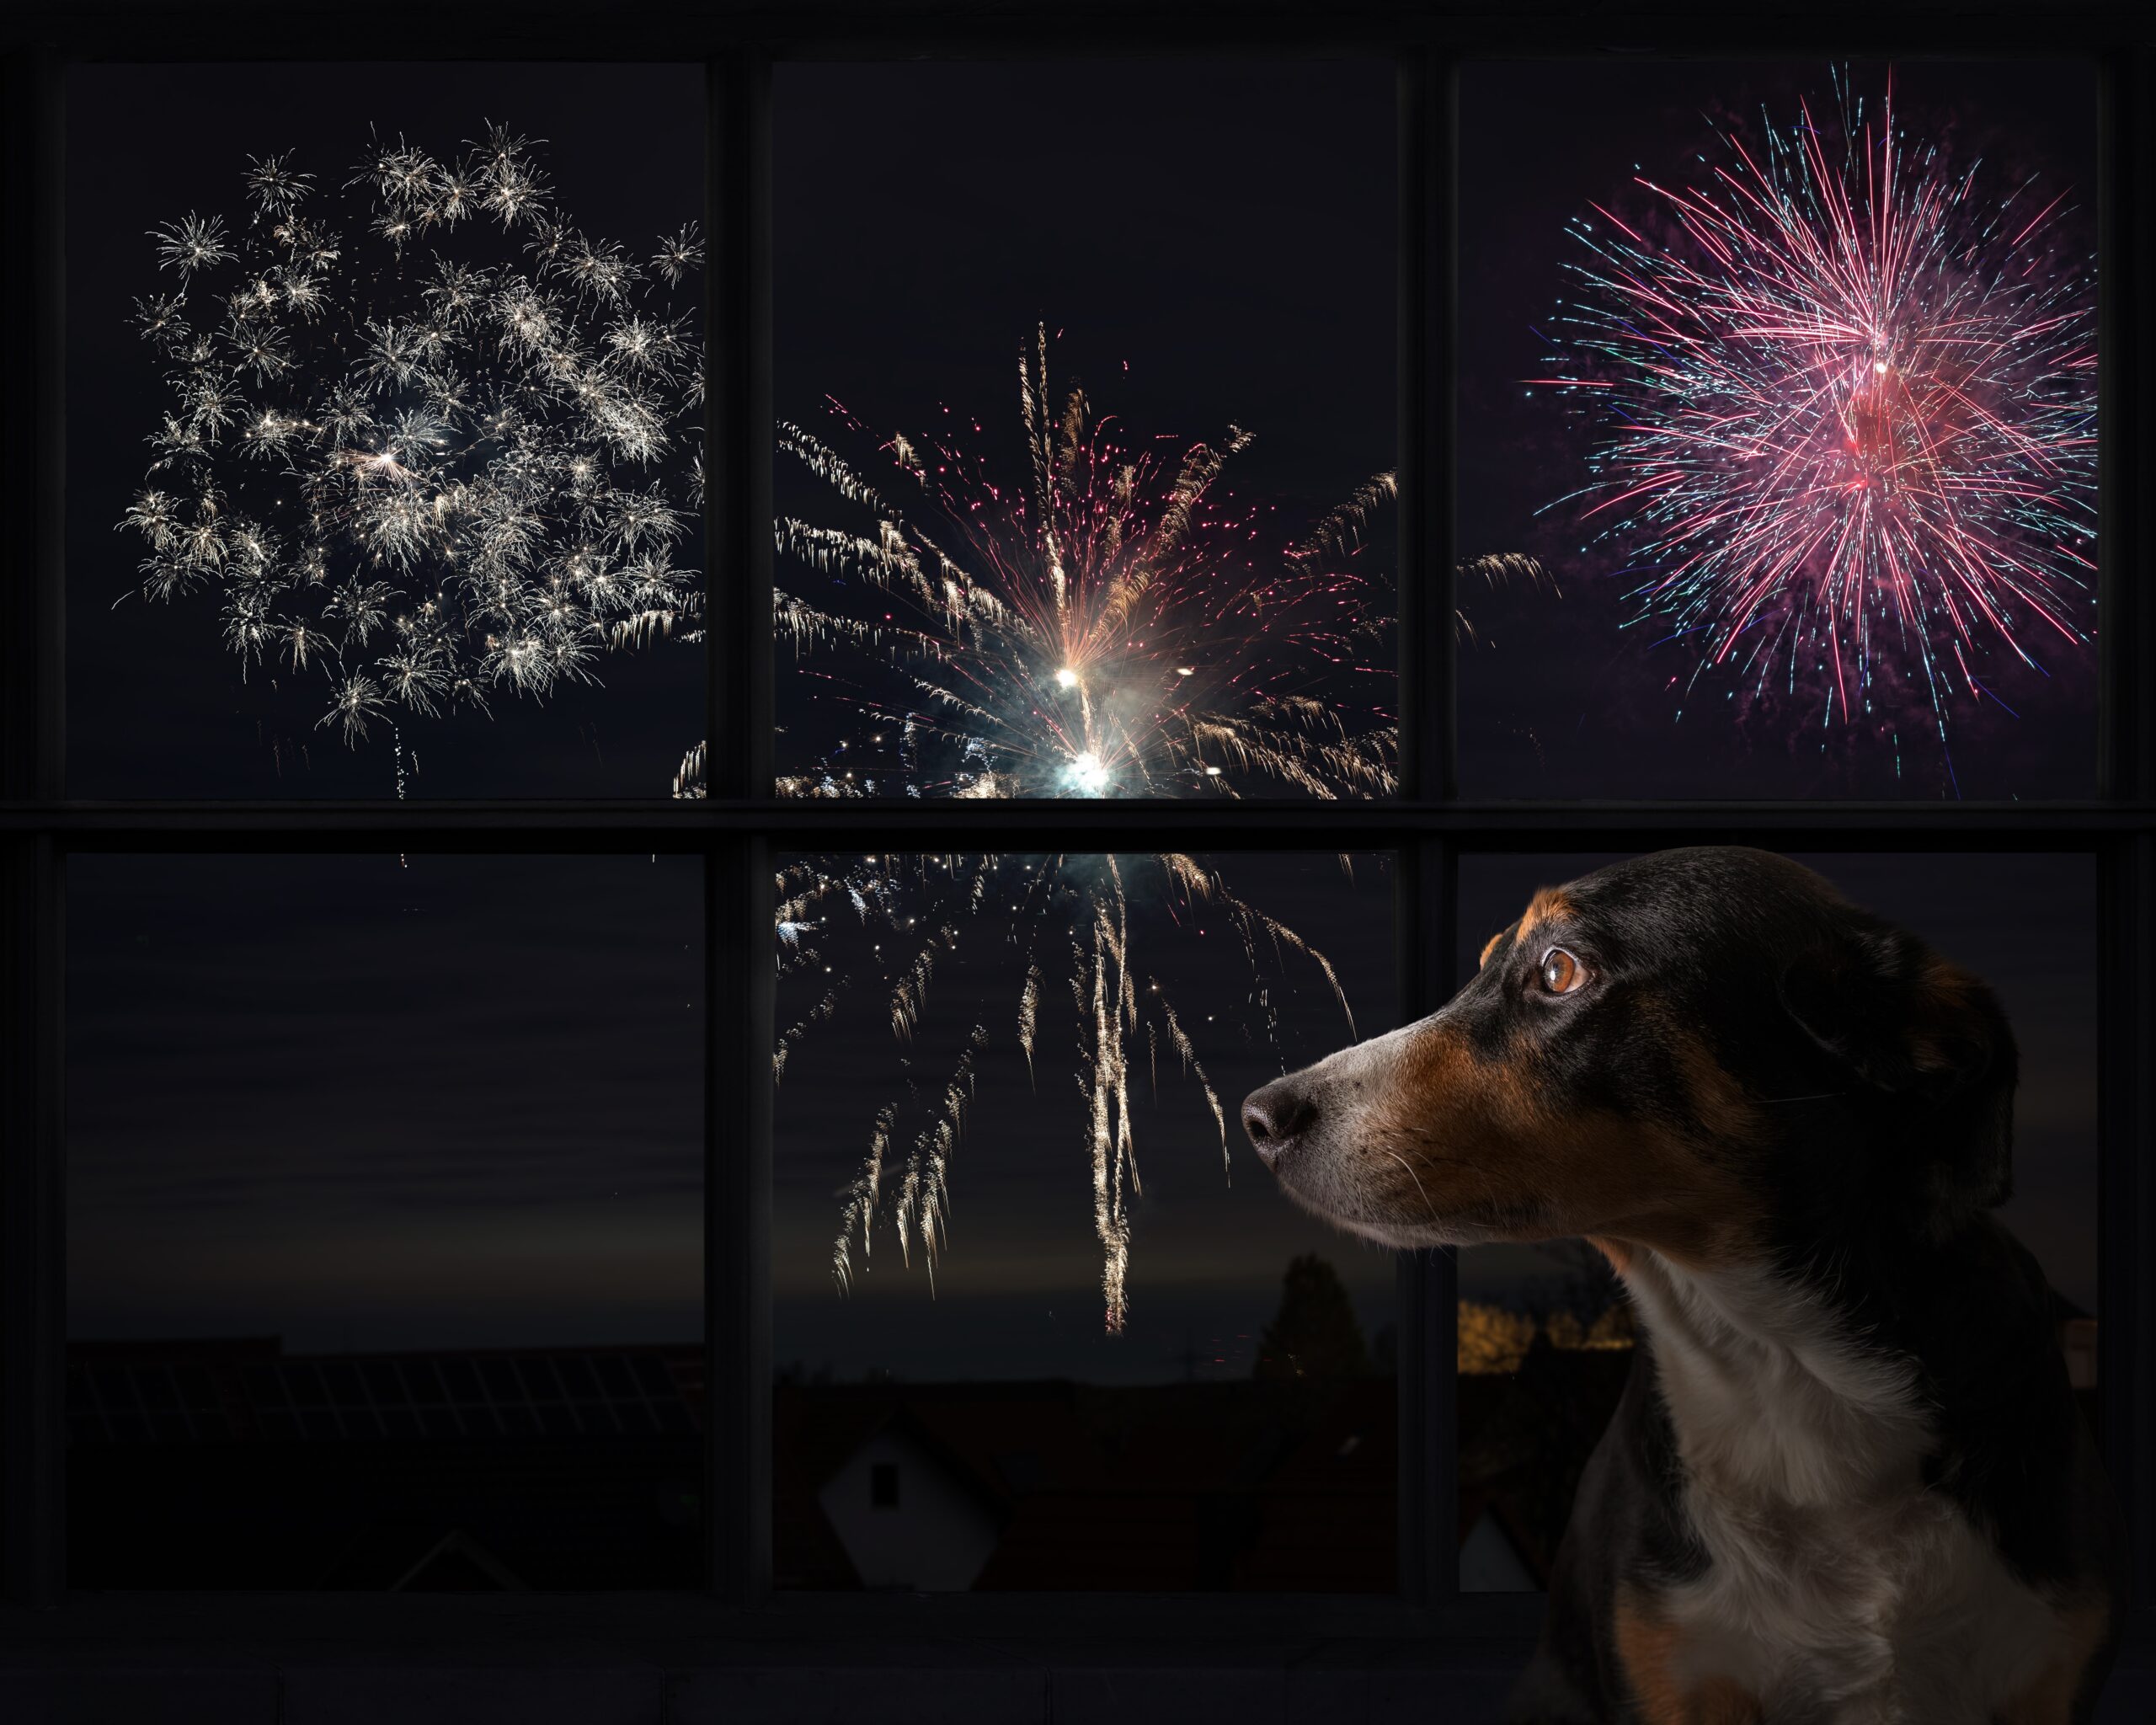 Dog intently watching fireworks through a window